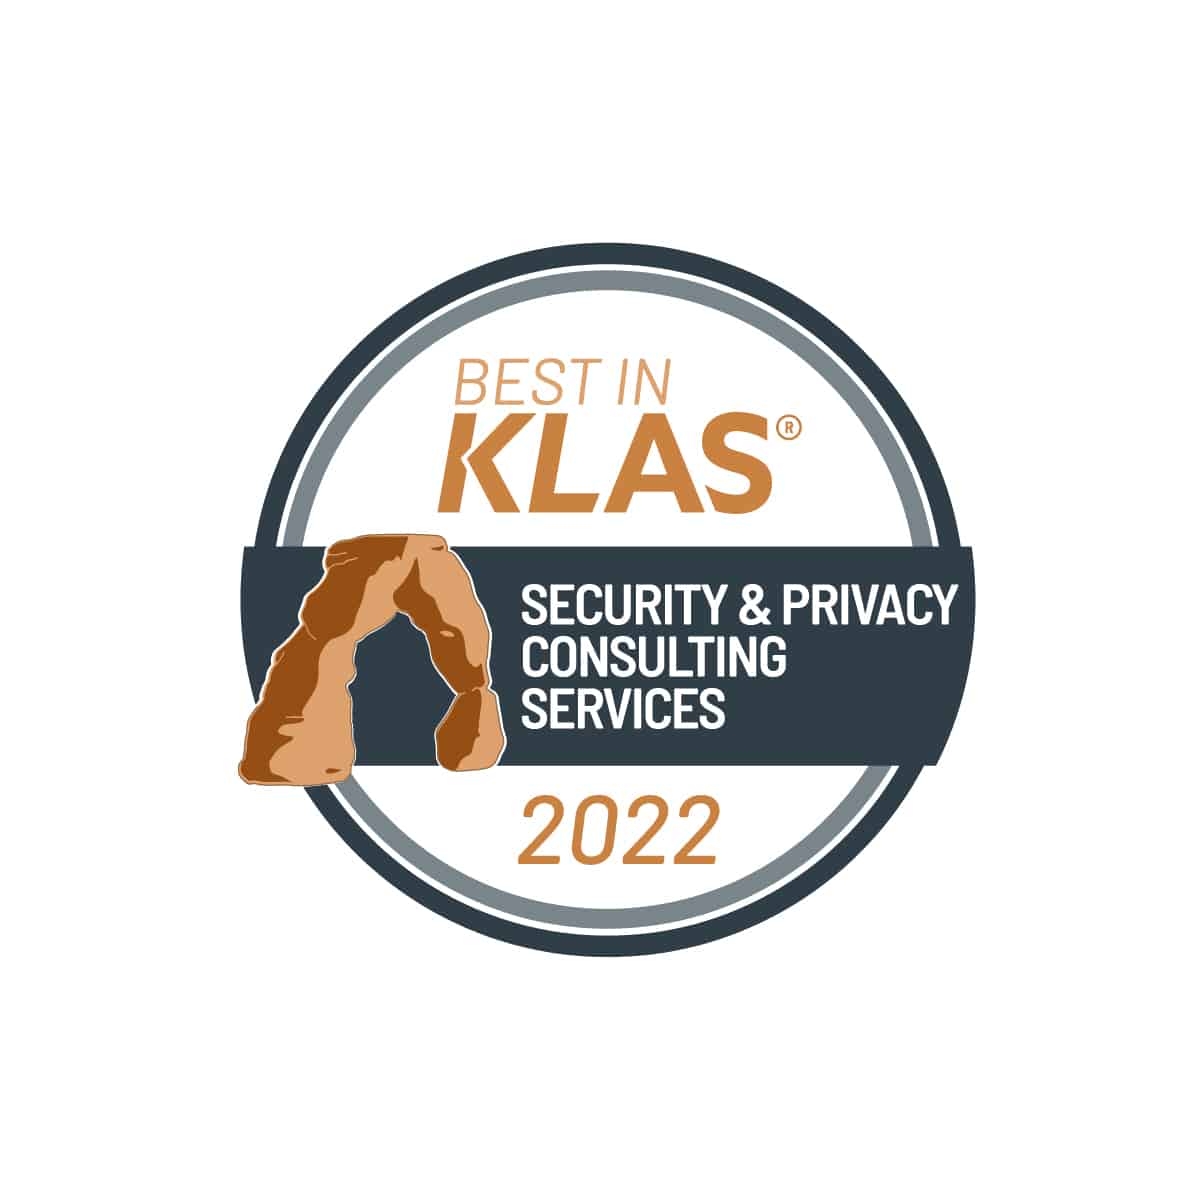 2022 best in klas security and privacy consulting services